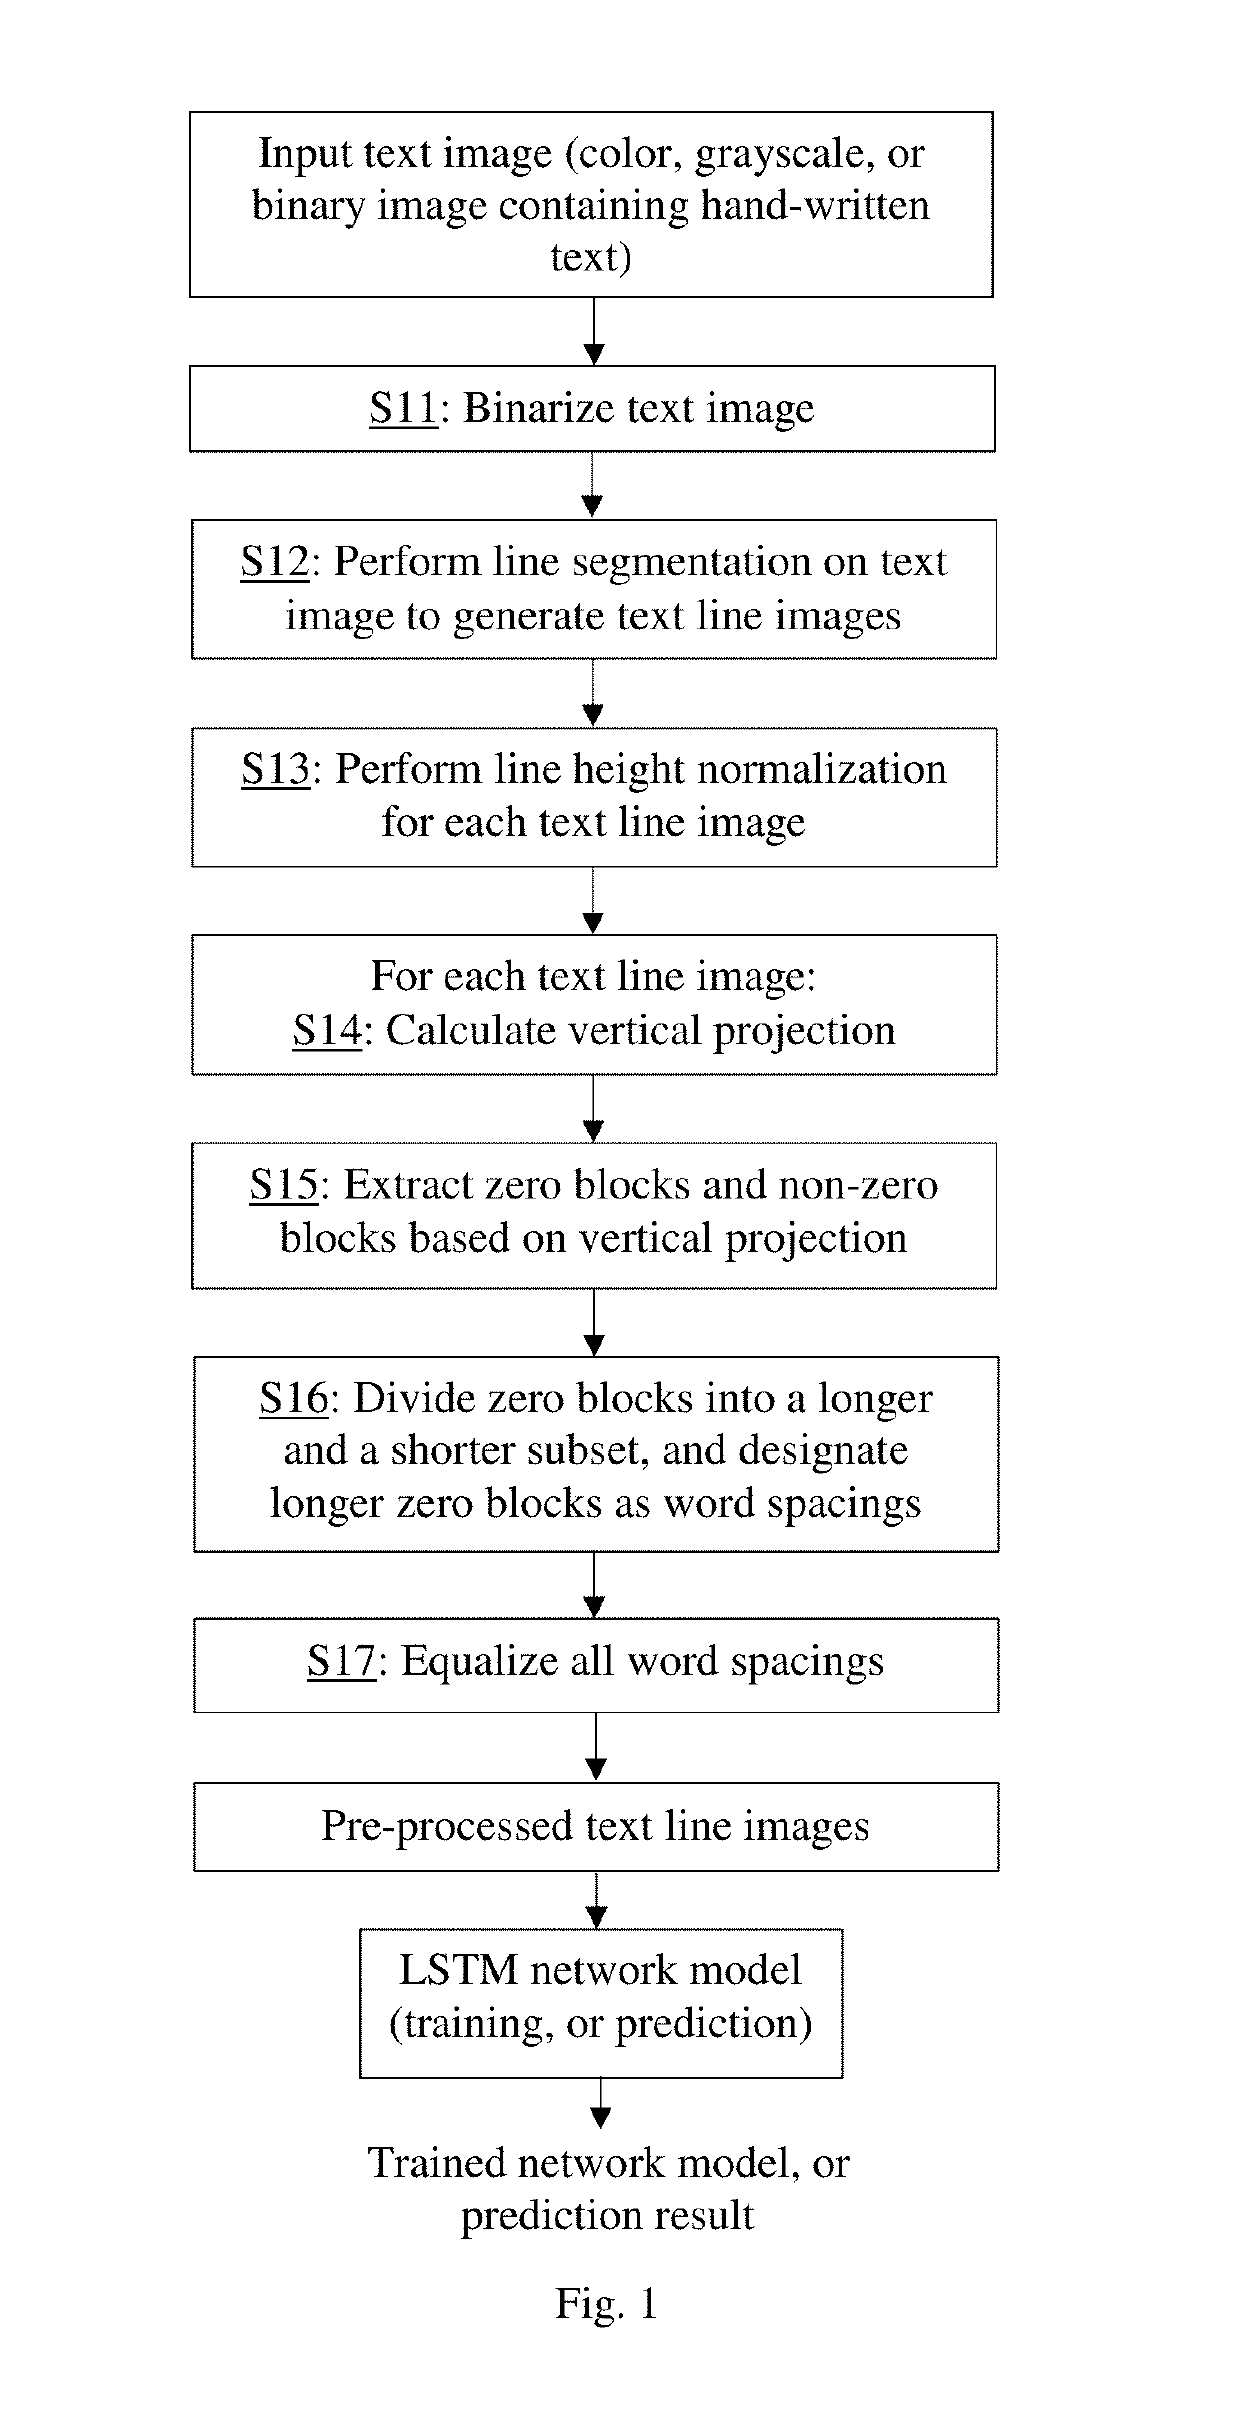 Text image processing using word spacing equalization for icr system employing artificial neural network